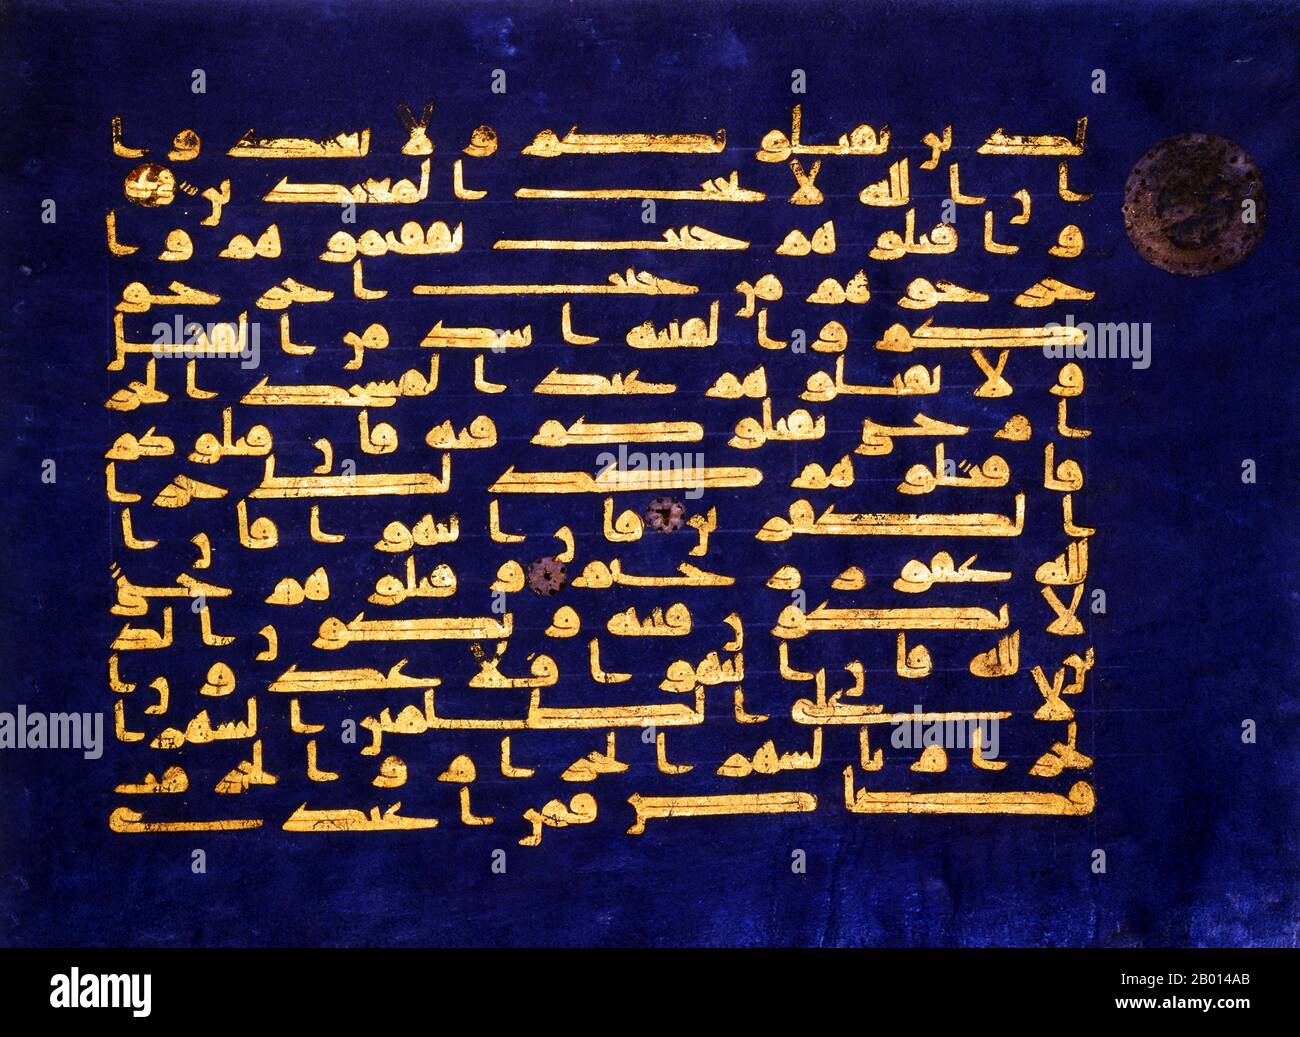 Tunisia: A leaf in Kufic script from the celebrated 'Blue Qur'an', thought to have been created in Tunisia during the 9th-10th century.  This early Koran is one of its period’s most famous, especially because of the parchment’s blue color, and the script in gold and verse markers in now-decomposed silver. It is difficult to read the text because the spaces between some of the individual letters and between each word are the same. In order to spread the text uniformly over the page, certain letters were moreover lengthened artificially, a practice called mashq. Stock Photo